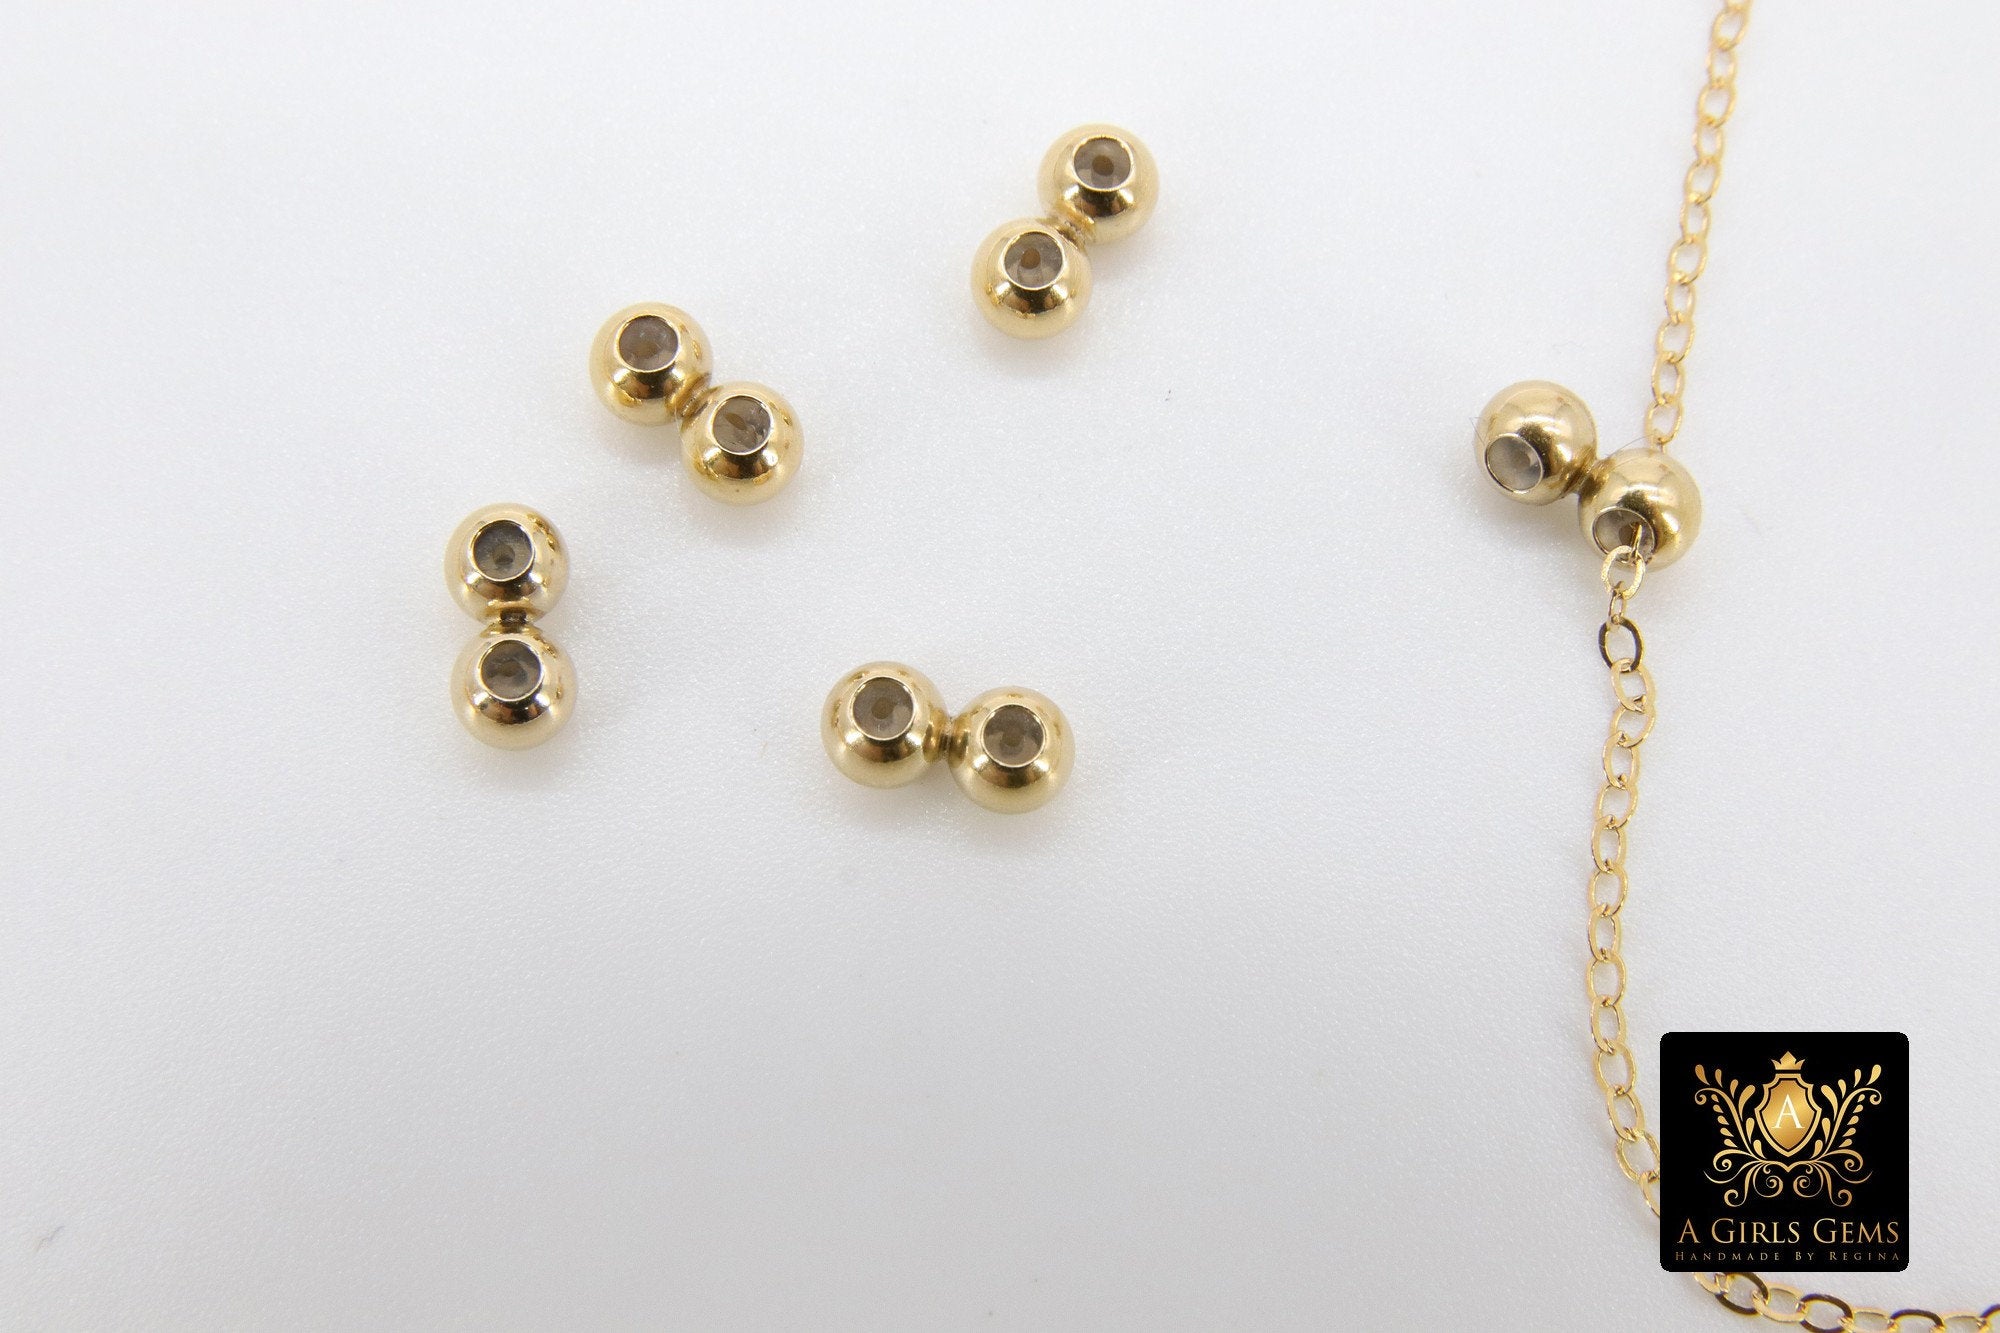 Slider Beads, 14 K Gold Filled Dainty Chain Silicon Stopper Beads #2144, 2 Hole Bolo, Lariat Jewelry Findings